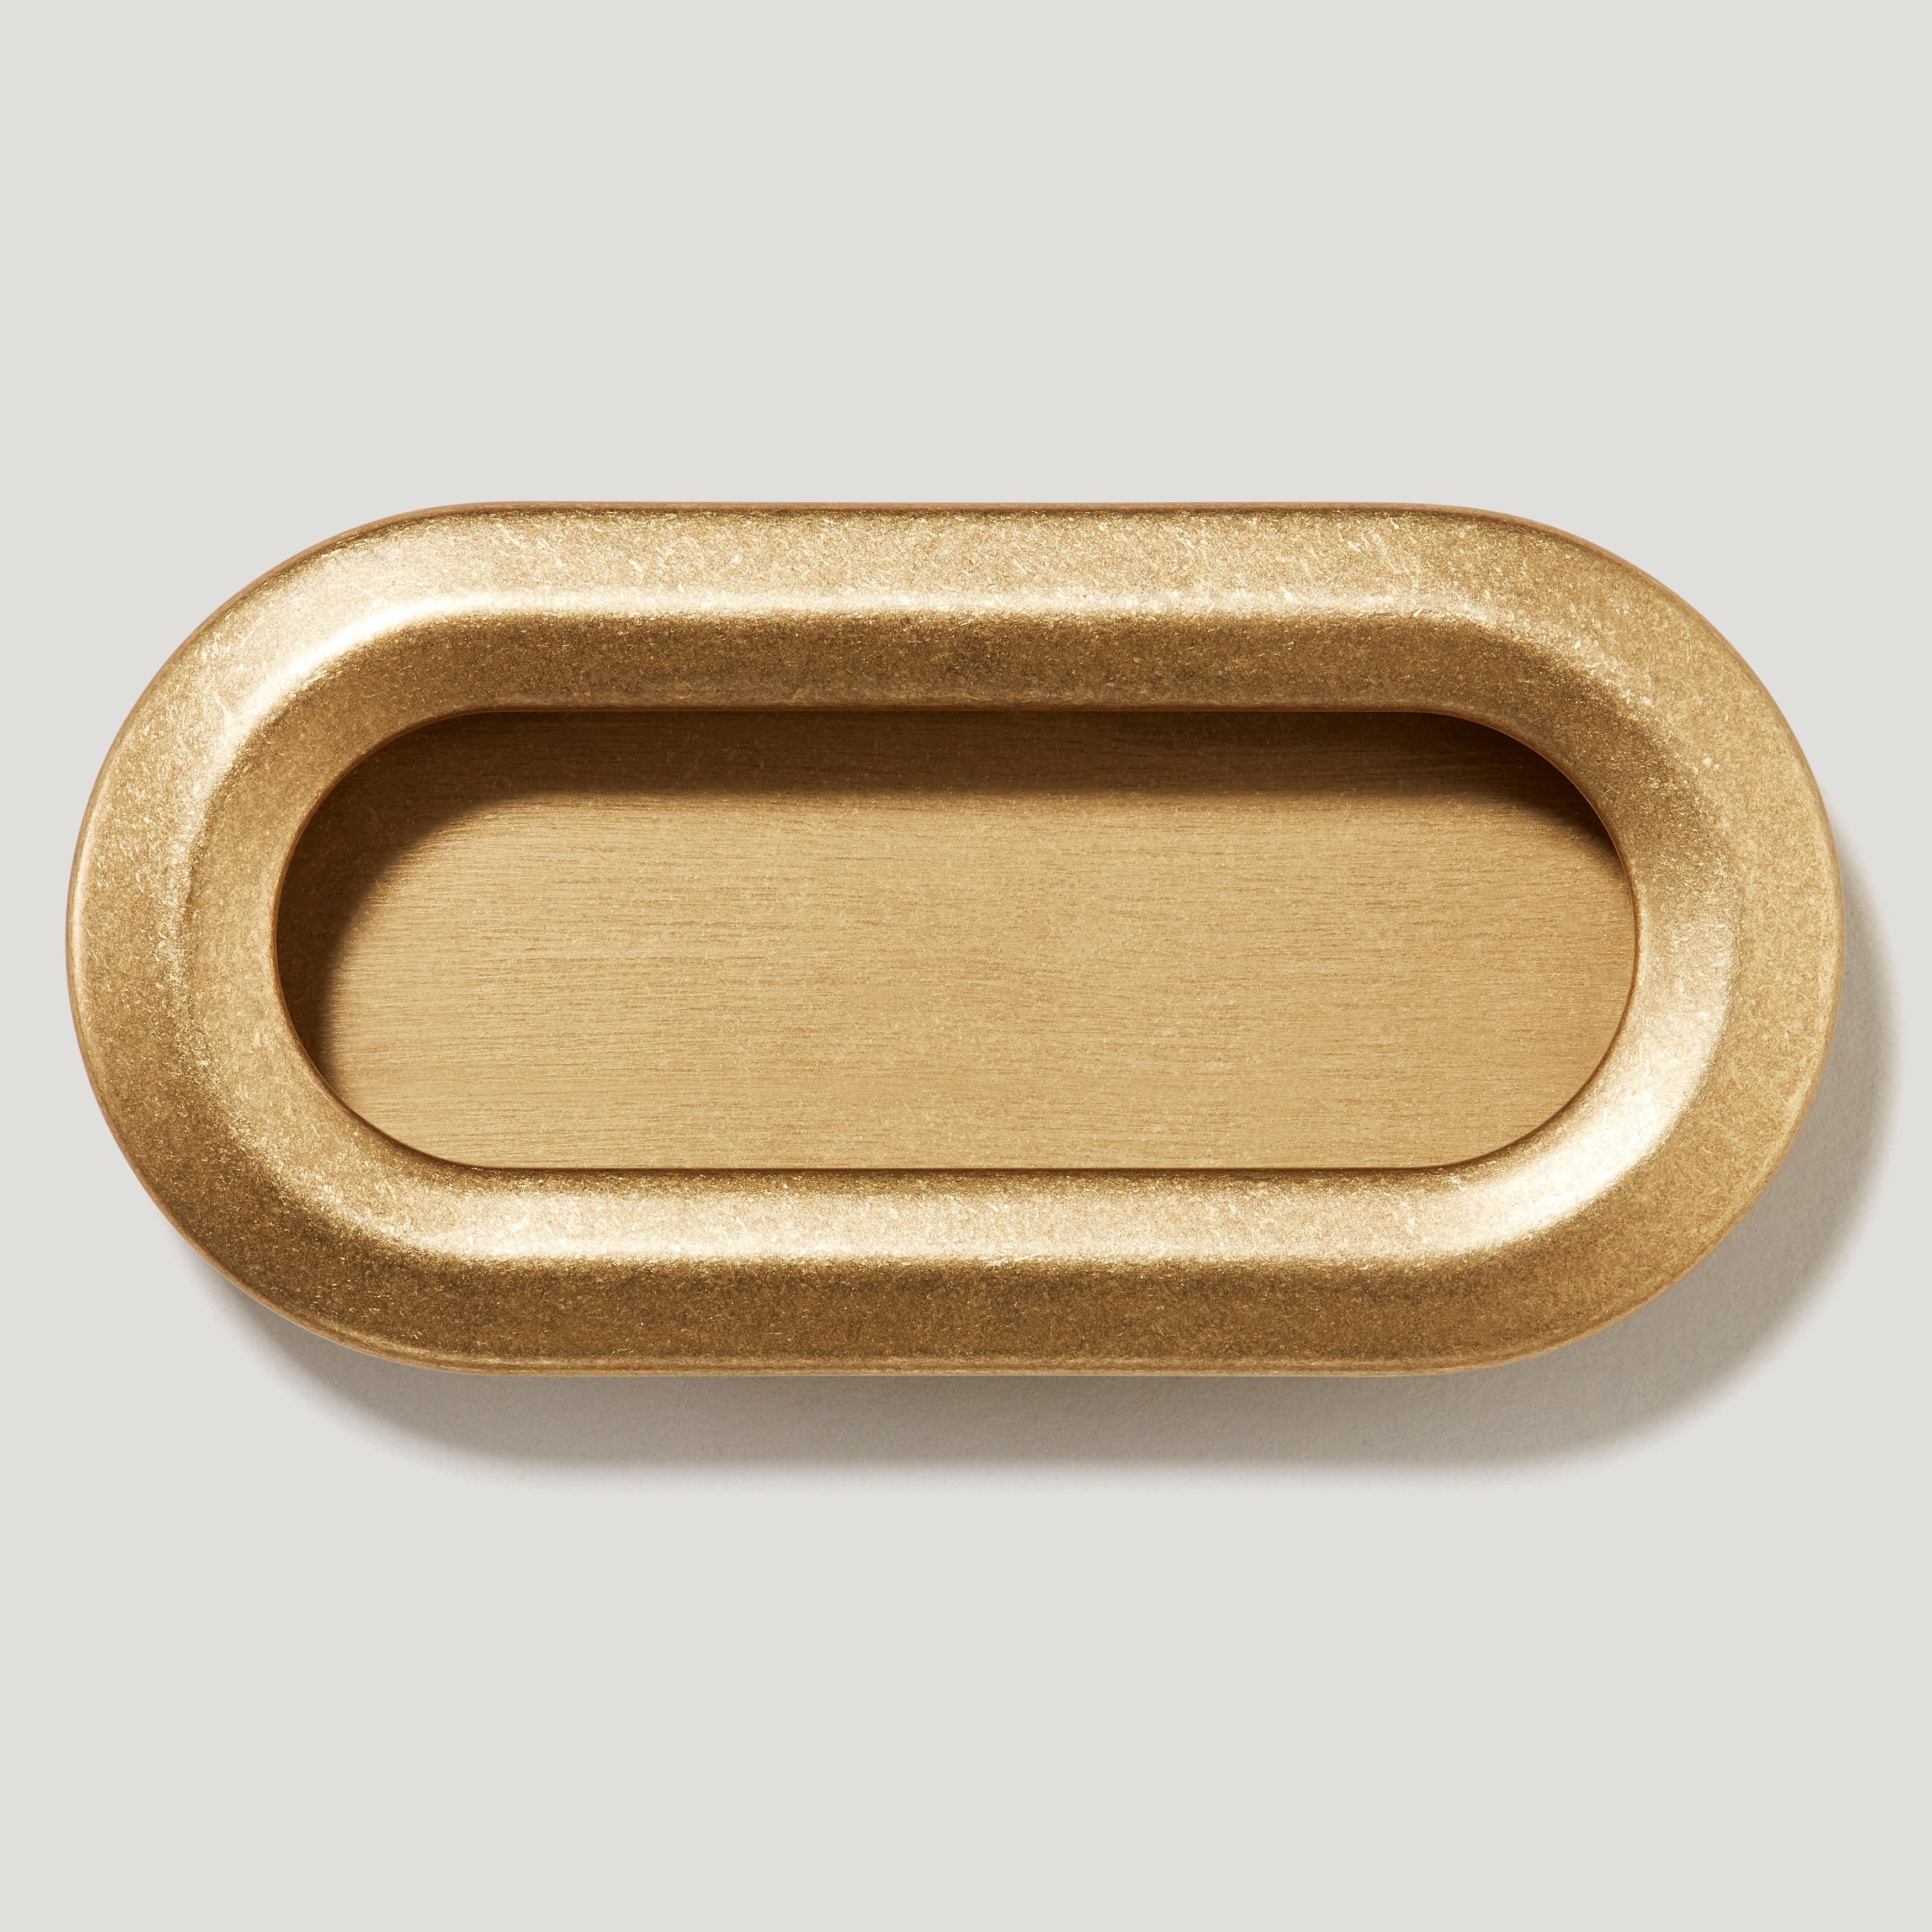 Plank Hardware OLMO Oval Recessed Pull Handle - Aged Brass